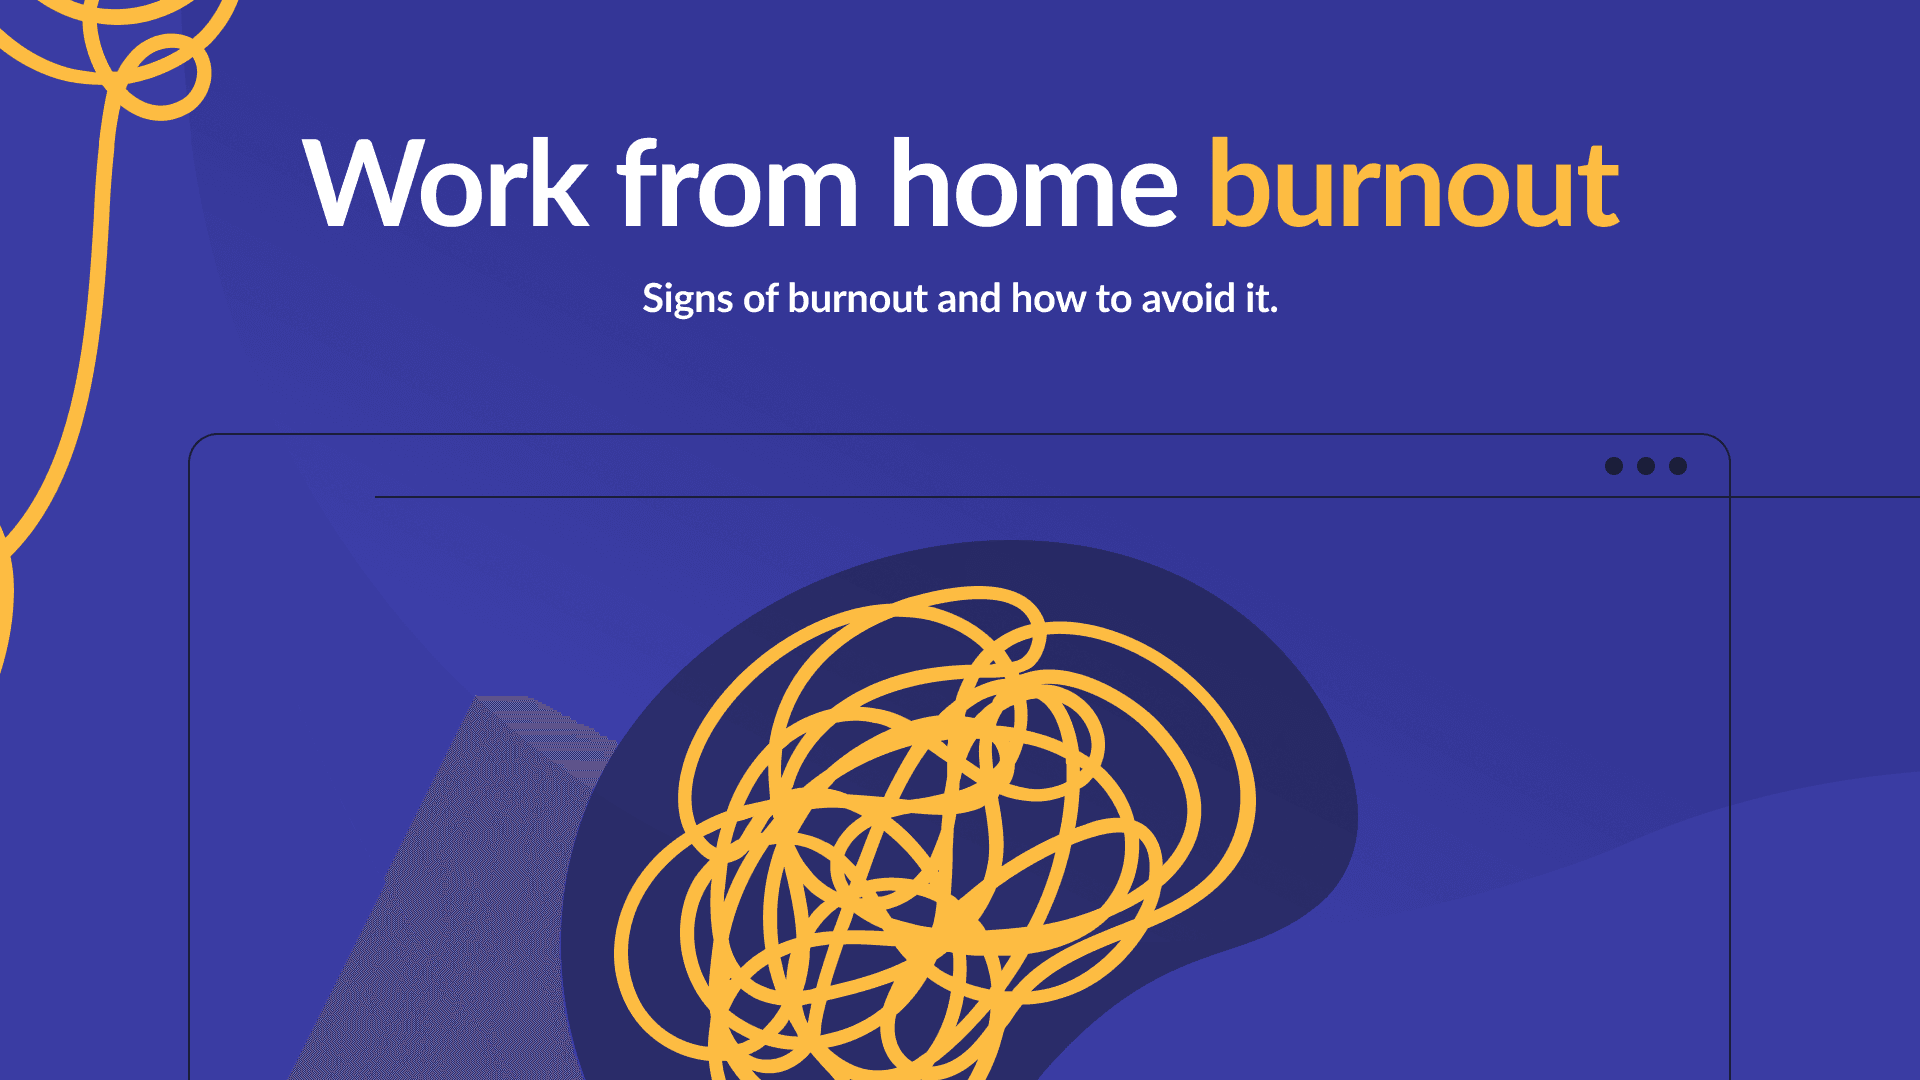 Image from work-from-home-burnout-1024x576